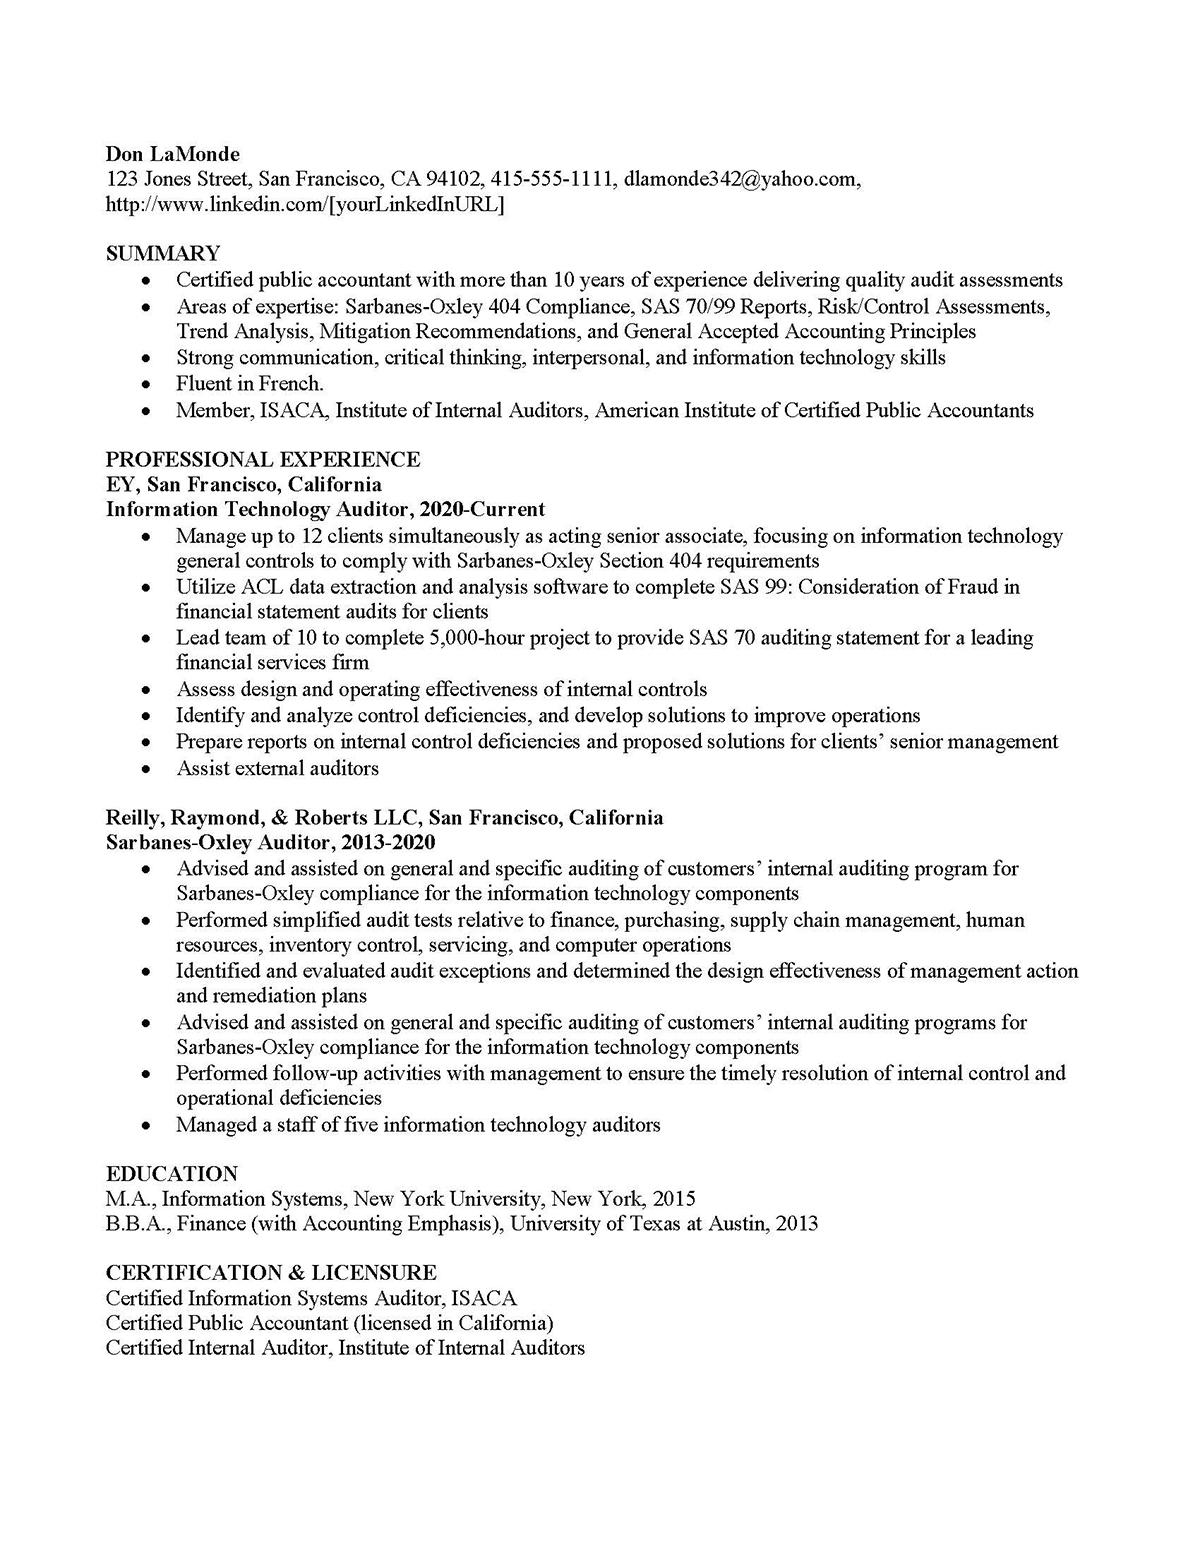 Sample resume: Auditing, High Experience, Chronological